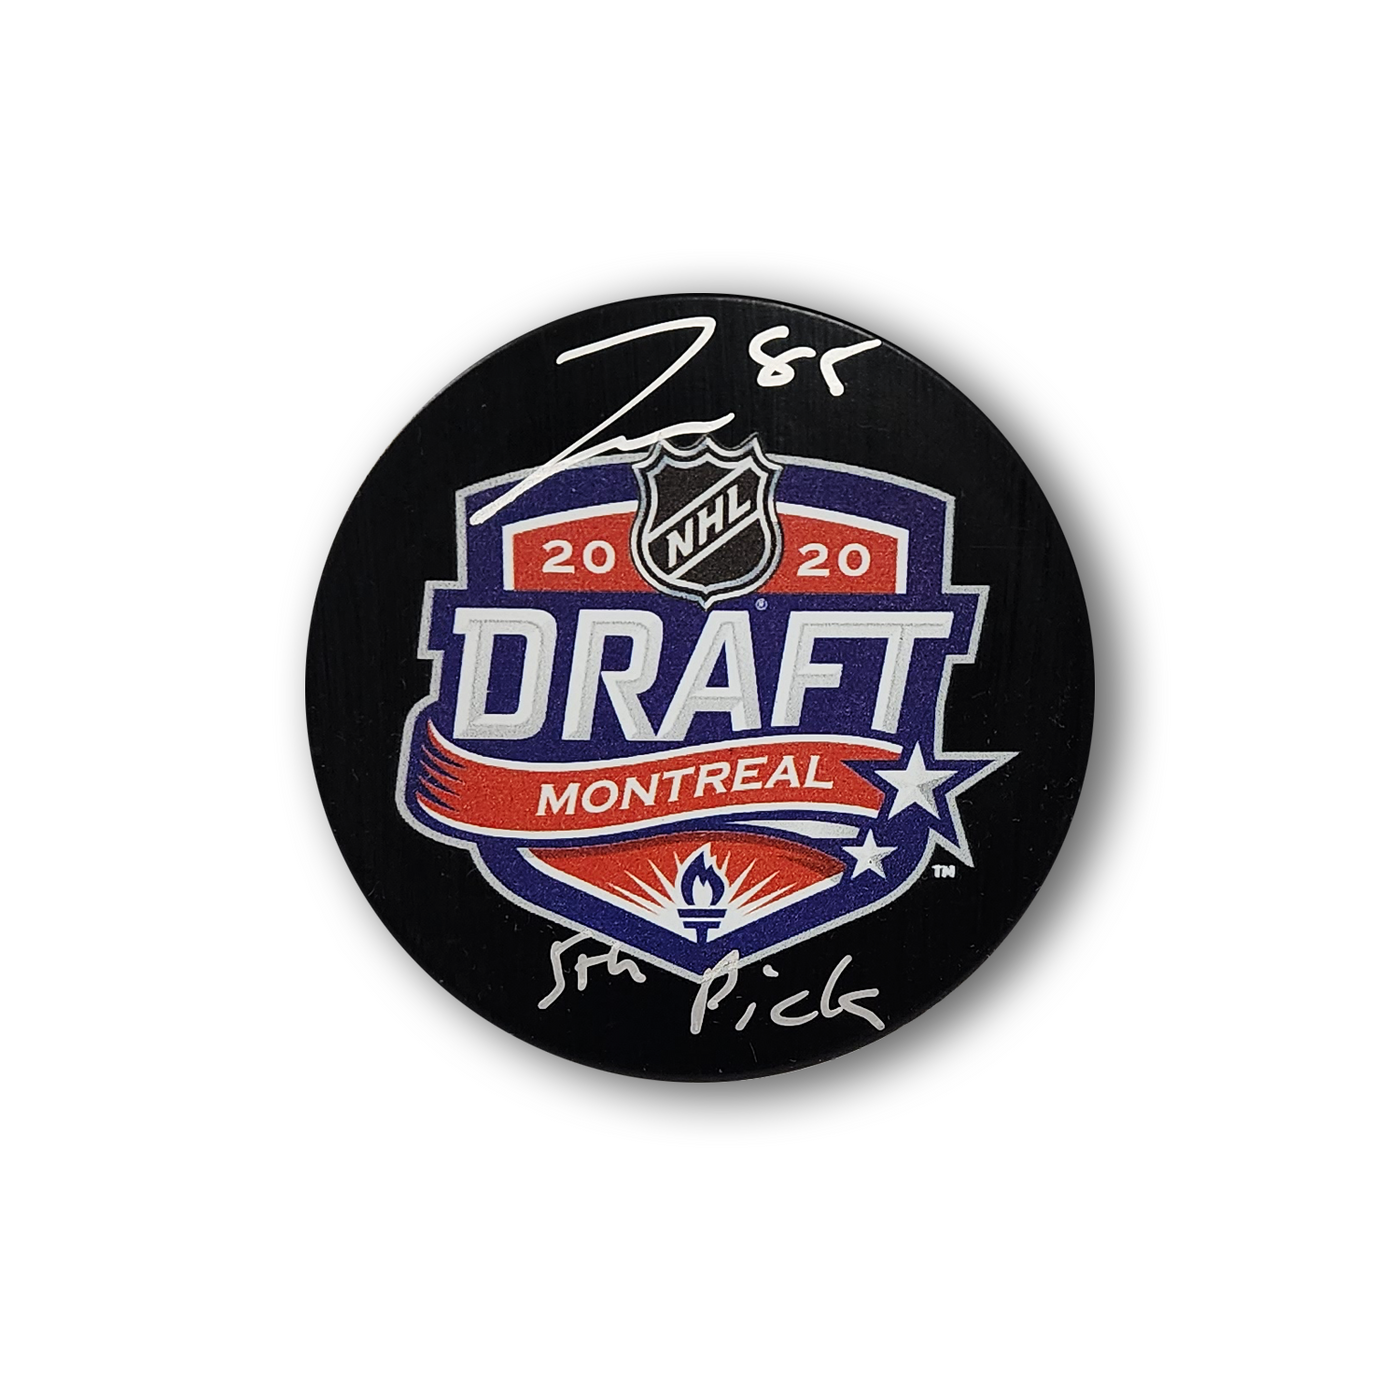 Jake Sanderson Autographed 2020 NHL Draft Hockey Puck Inscribed 5th Pick